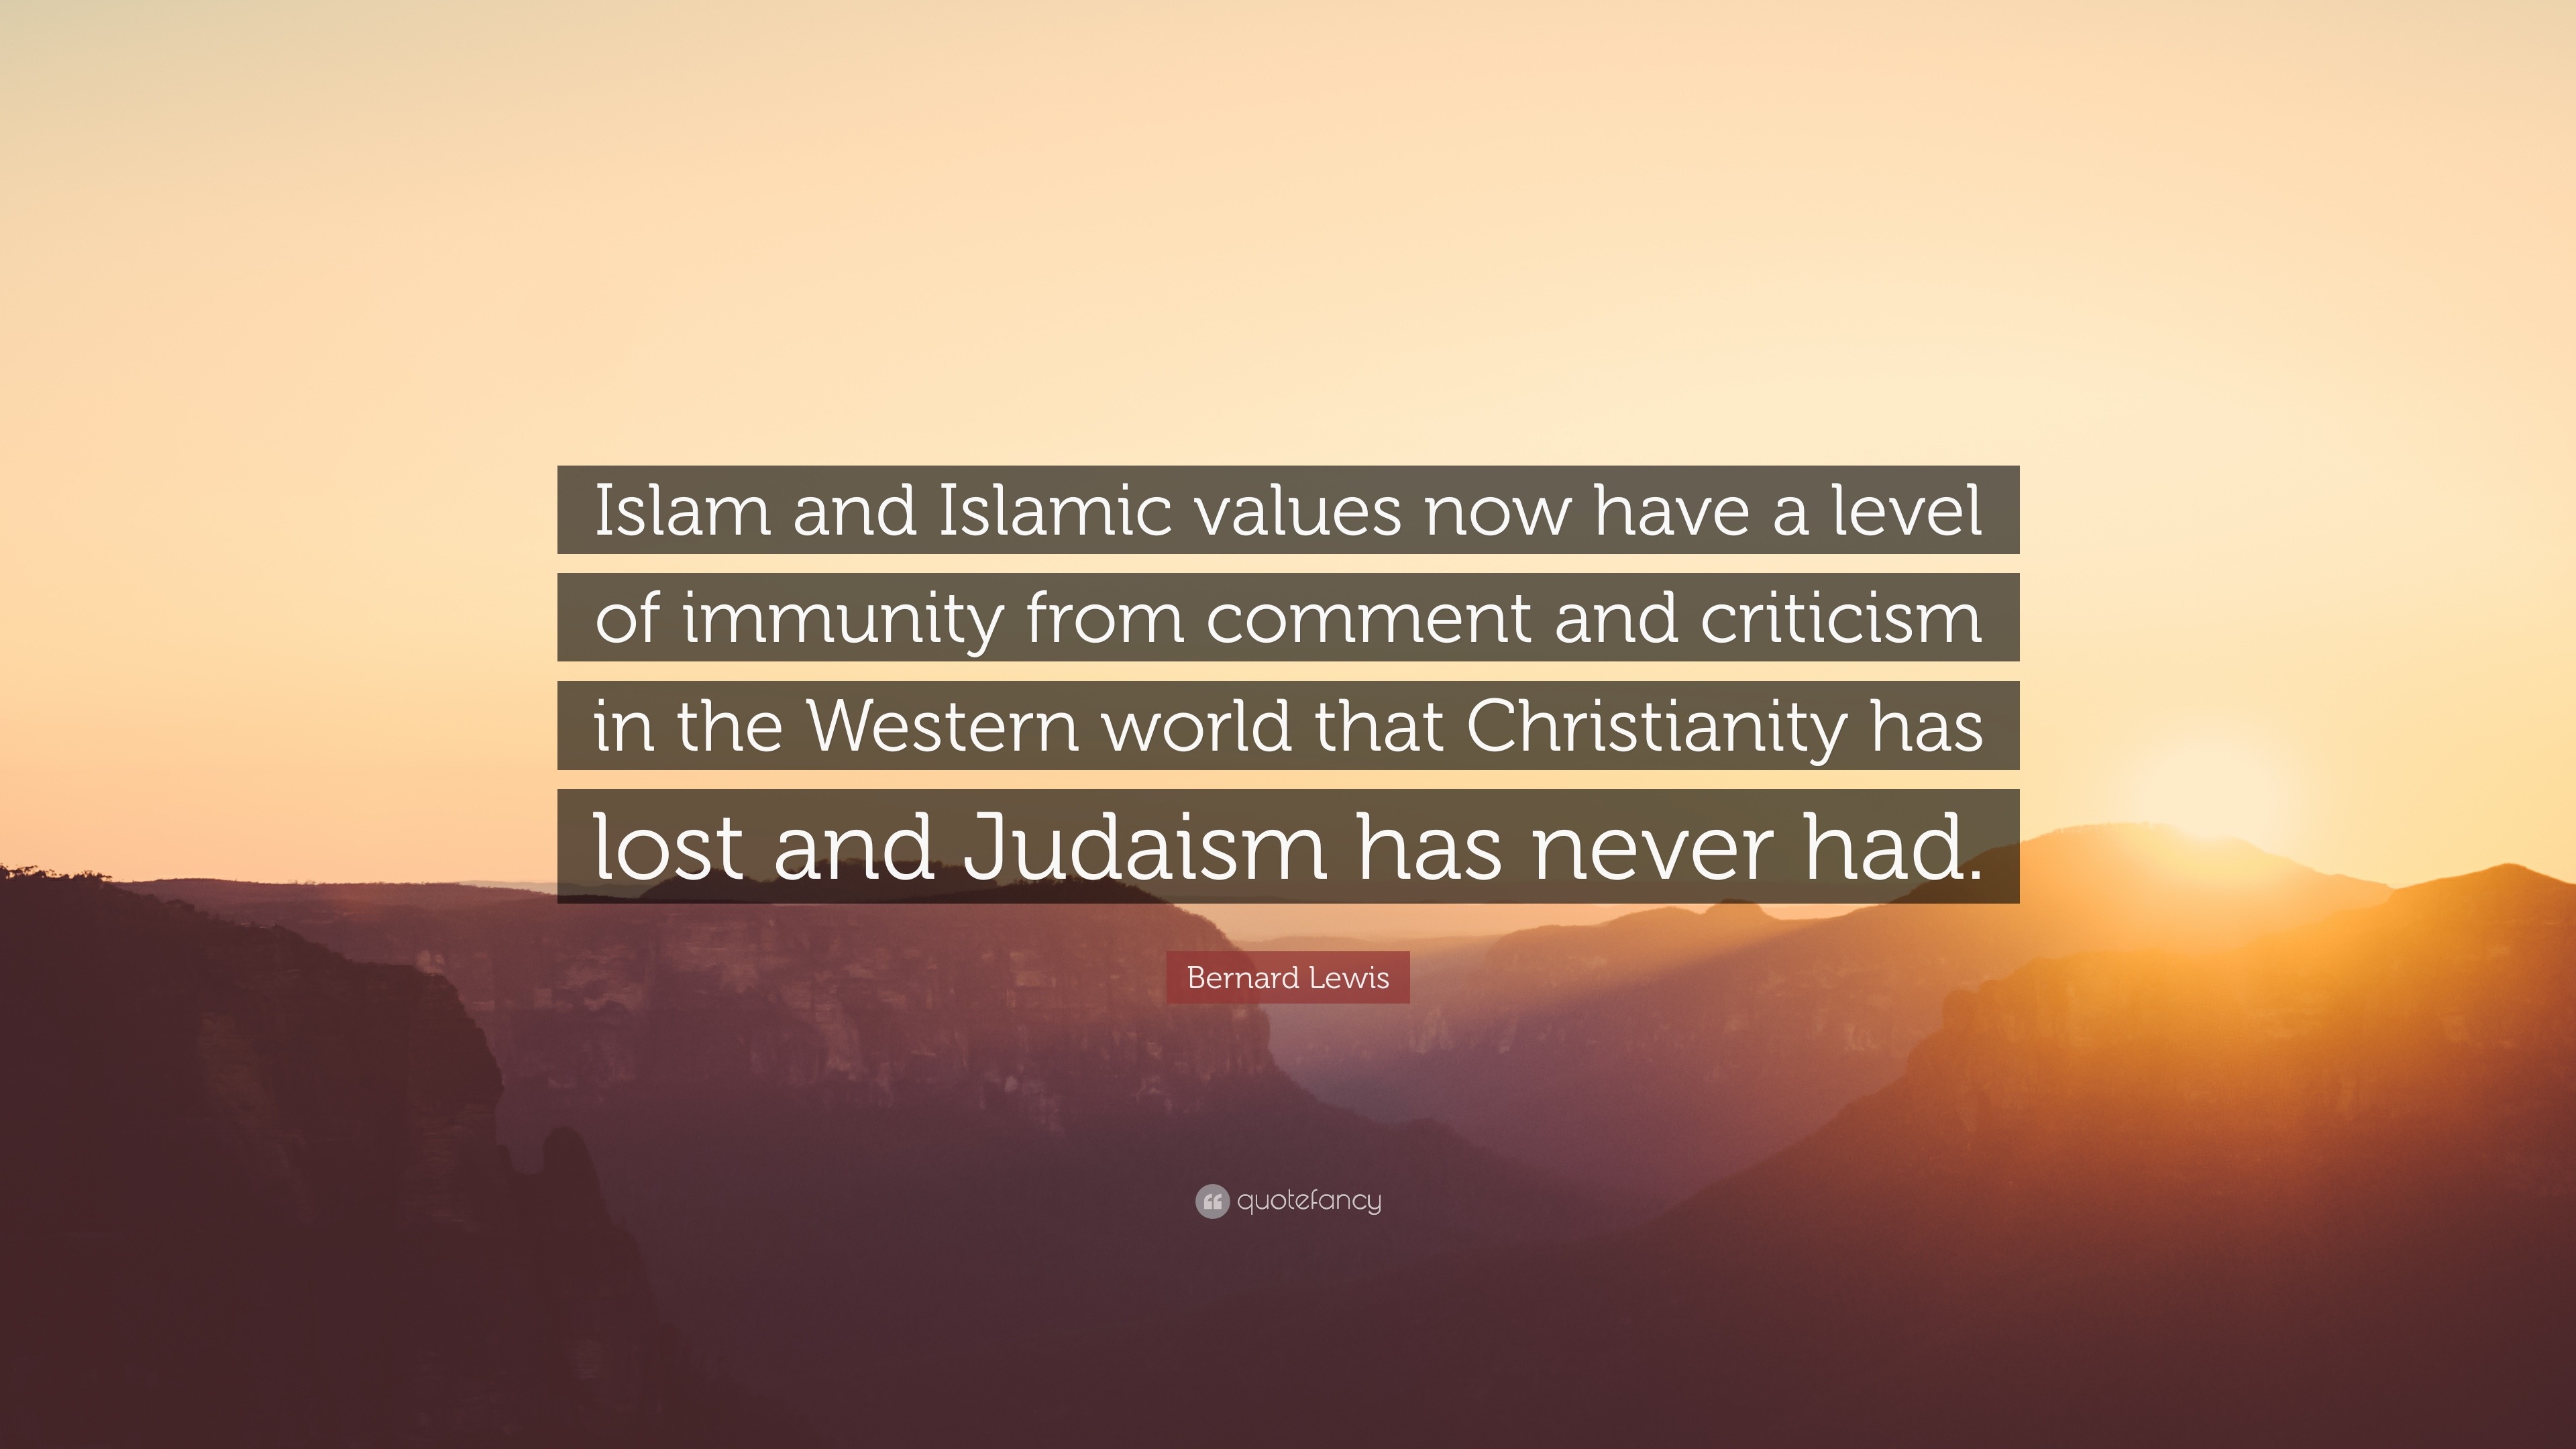 Onwijs Bernard Lewis Quote: “Islam and Islamic values now have a level of OG-65